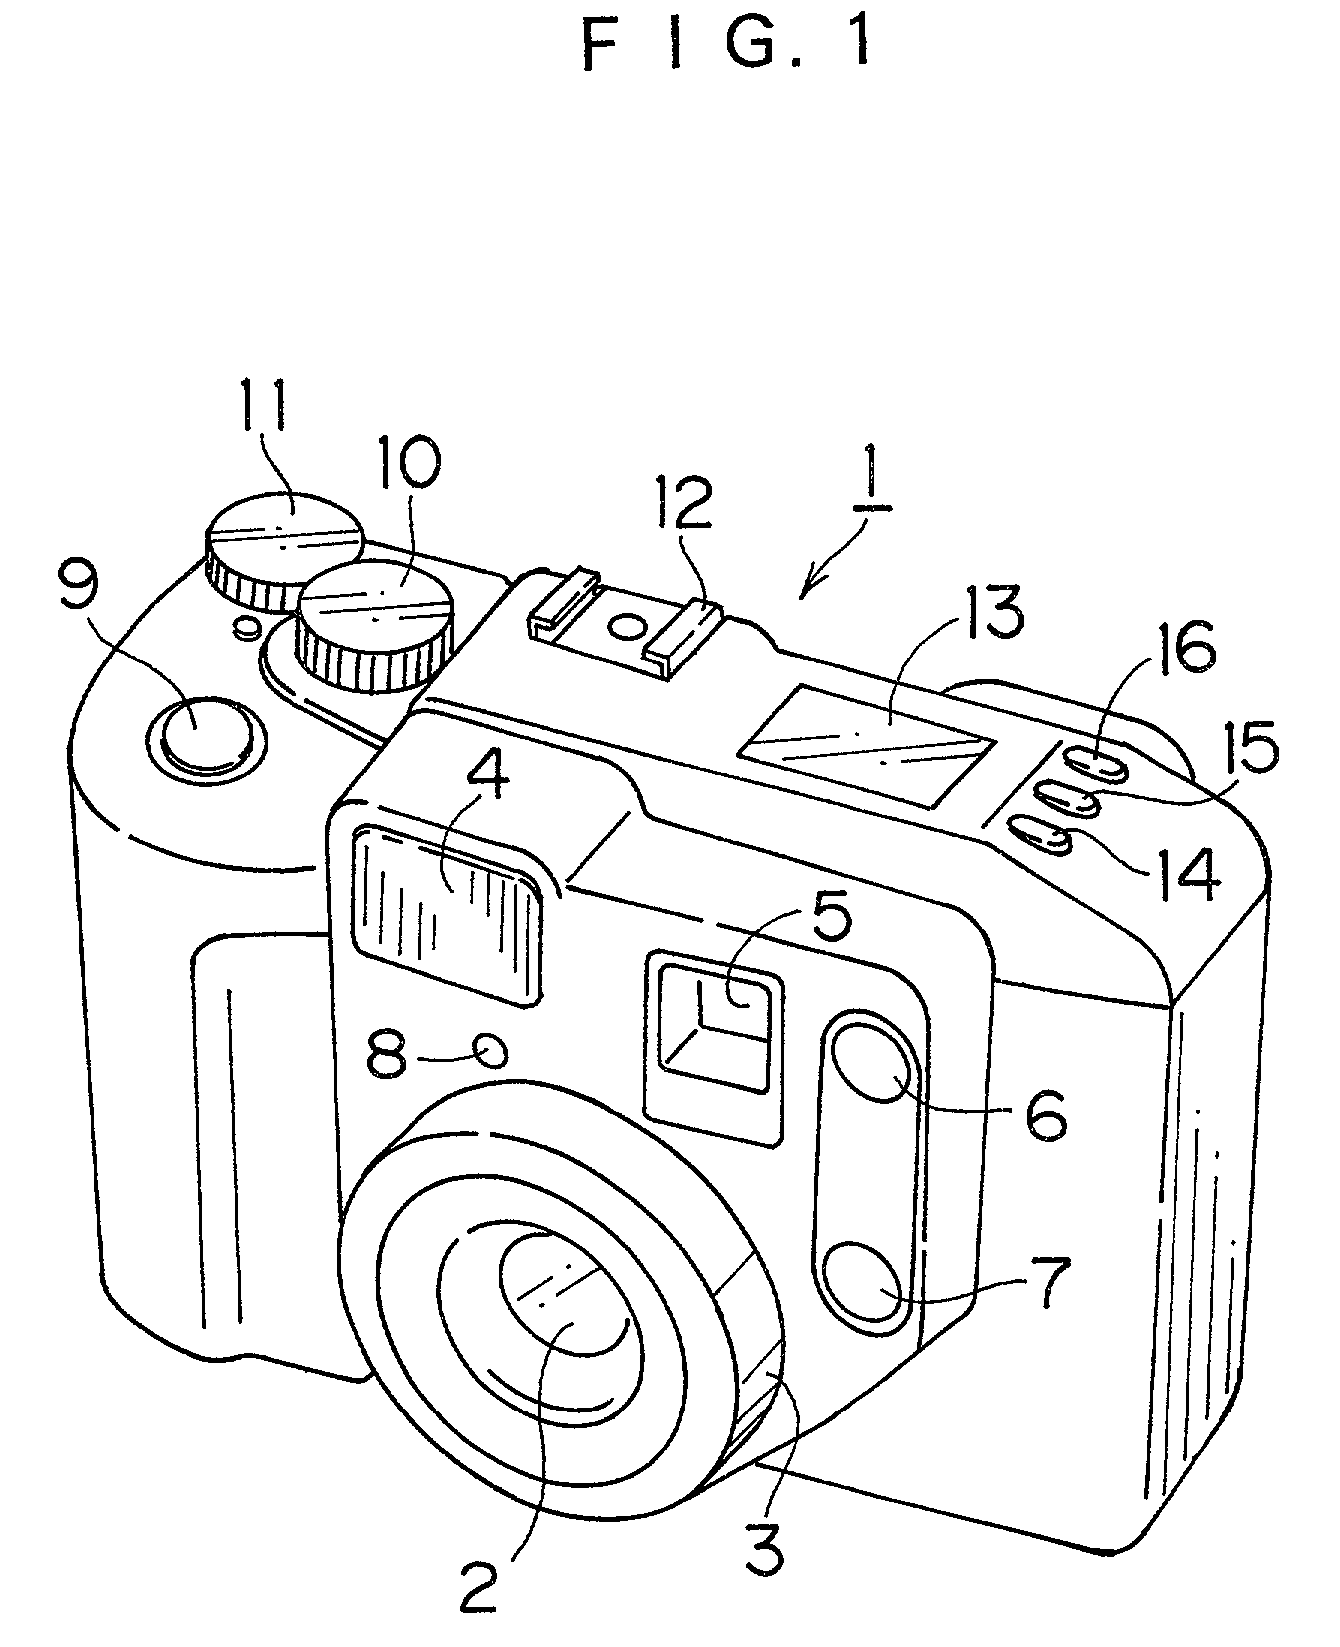 Identification photo system and image processing method which automatically corrects image data of a person in an identification photo